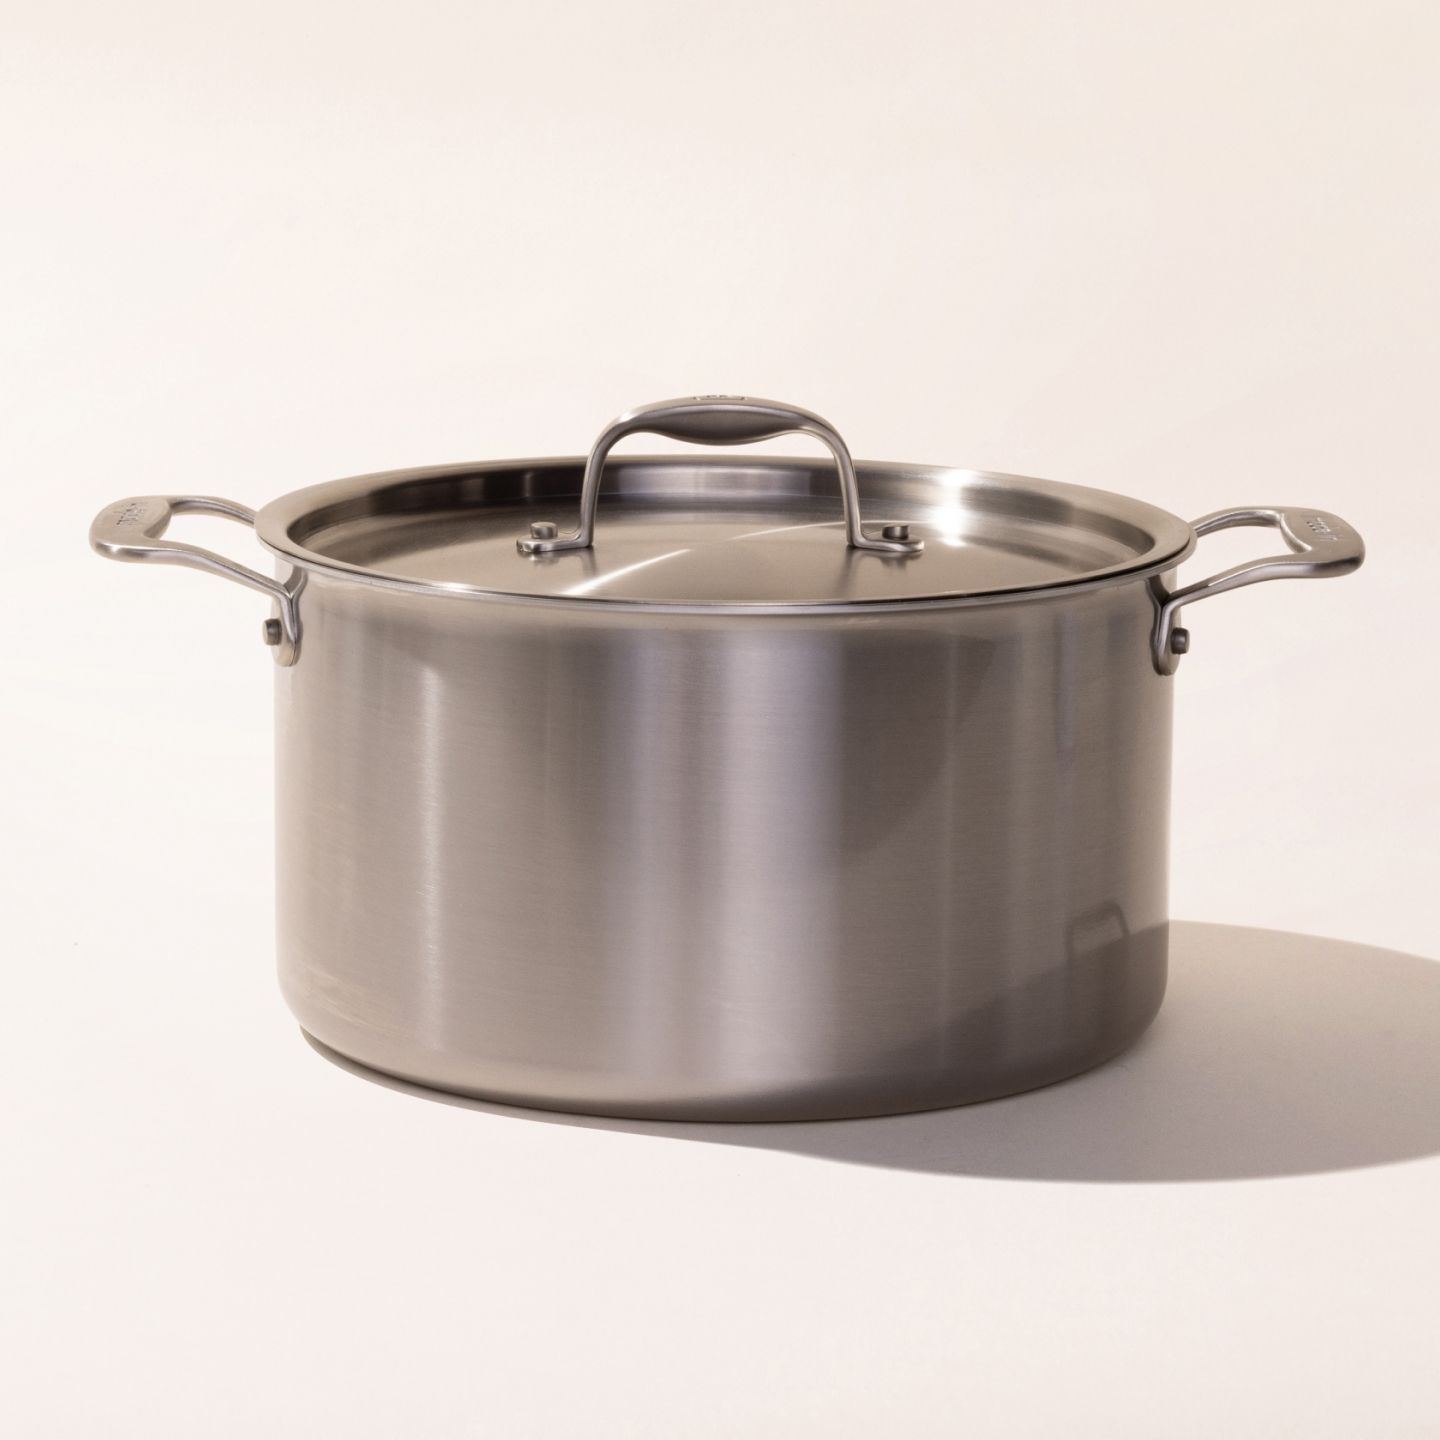 large-online-shopping-mall-quality-and-comfort-stainless-steel-pot-with